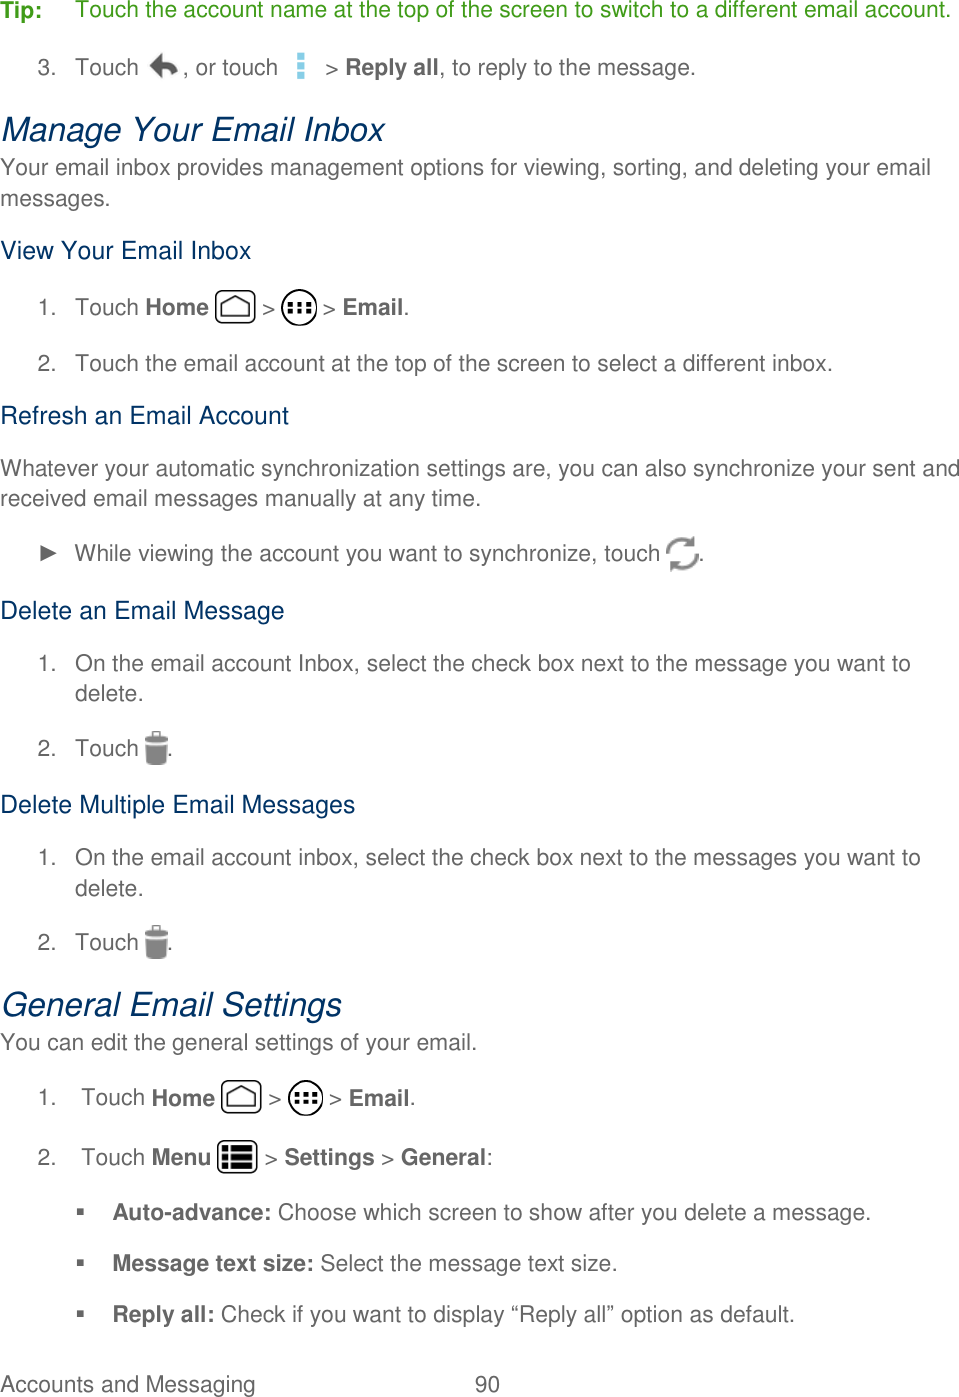 Accounts and Messaging  90   Tip:  Touch the account name at the top of the screen to switch to a different email account. 3.  Touch  , or touch   &gt; Reply all, to reply to the message. Manage Your Email Inbox Your email inbox provides management options for viewing, sorting, and deleting your email messages. View Your Email Inbox 1.  Touch Home   &gt;   &gt; Email. 2.  Touch the email account at the top of the screen to select a different inbox. Refresh an Email Account Whatever your automatic synchronization settings are, you can also synchronize your sent and received email messages manually at any time. ►  While viewing the account you want to synchronize, touch  . Delete an Email Message 1.  On the email account Inbox, select the check box next to the message you want to delete. 2.  Touch  . Delete Multiple Email Messages 1.  On the email account inbox, select the check box next to the messages you want to delete. 2.  Touch  . General Email Settings You can edit the general settings of your email.  1.  Touch Home   &gt;   &gt; Email. 2.  Touch Menu   &gt; Settings &gt; General:  Auto-advance: Choose which screen to show after you delete a message.  Message text size: Select the message text size.  Reply all: Check if you want to display “Reply all” option as default. 